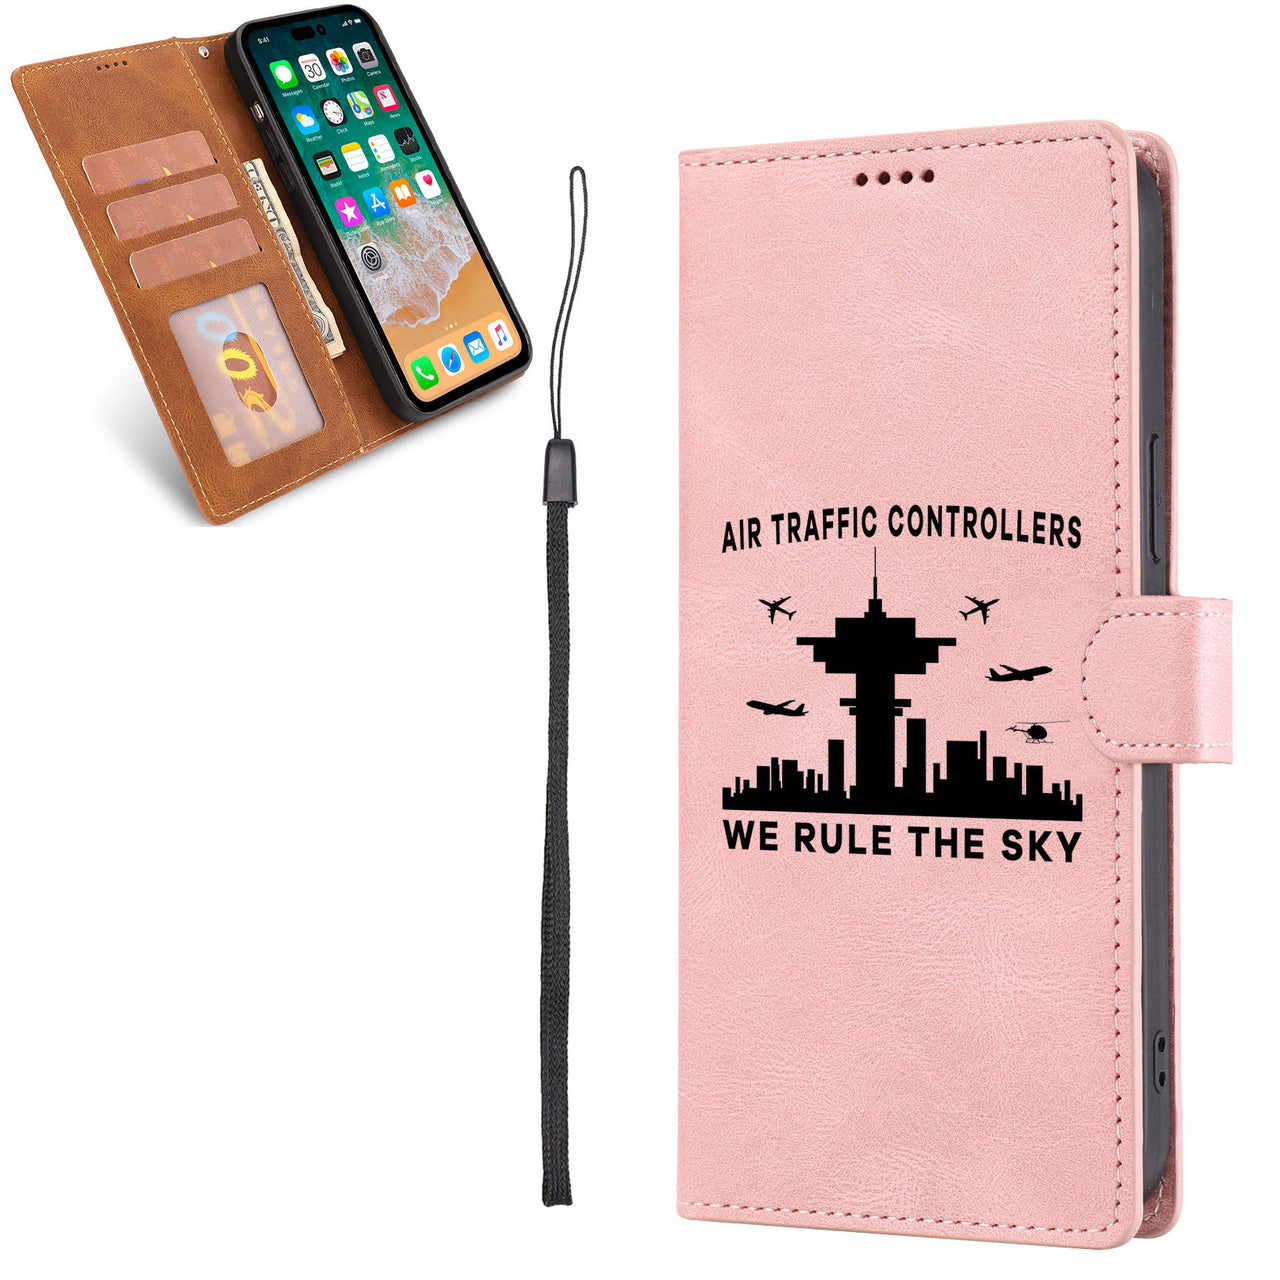 Air Traffic Controllers - We Rule The Sky Designed Leather iPhone Cases